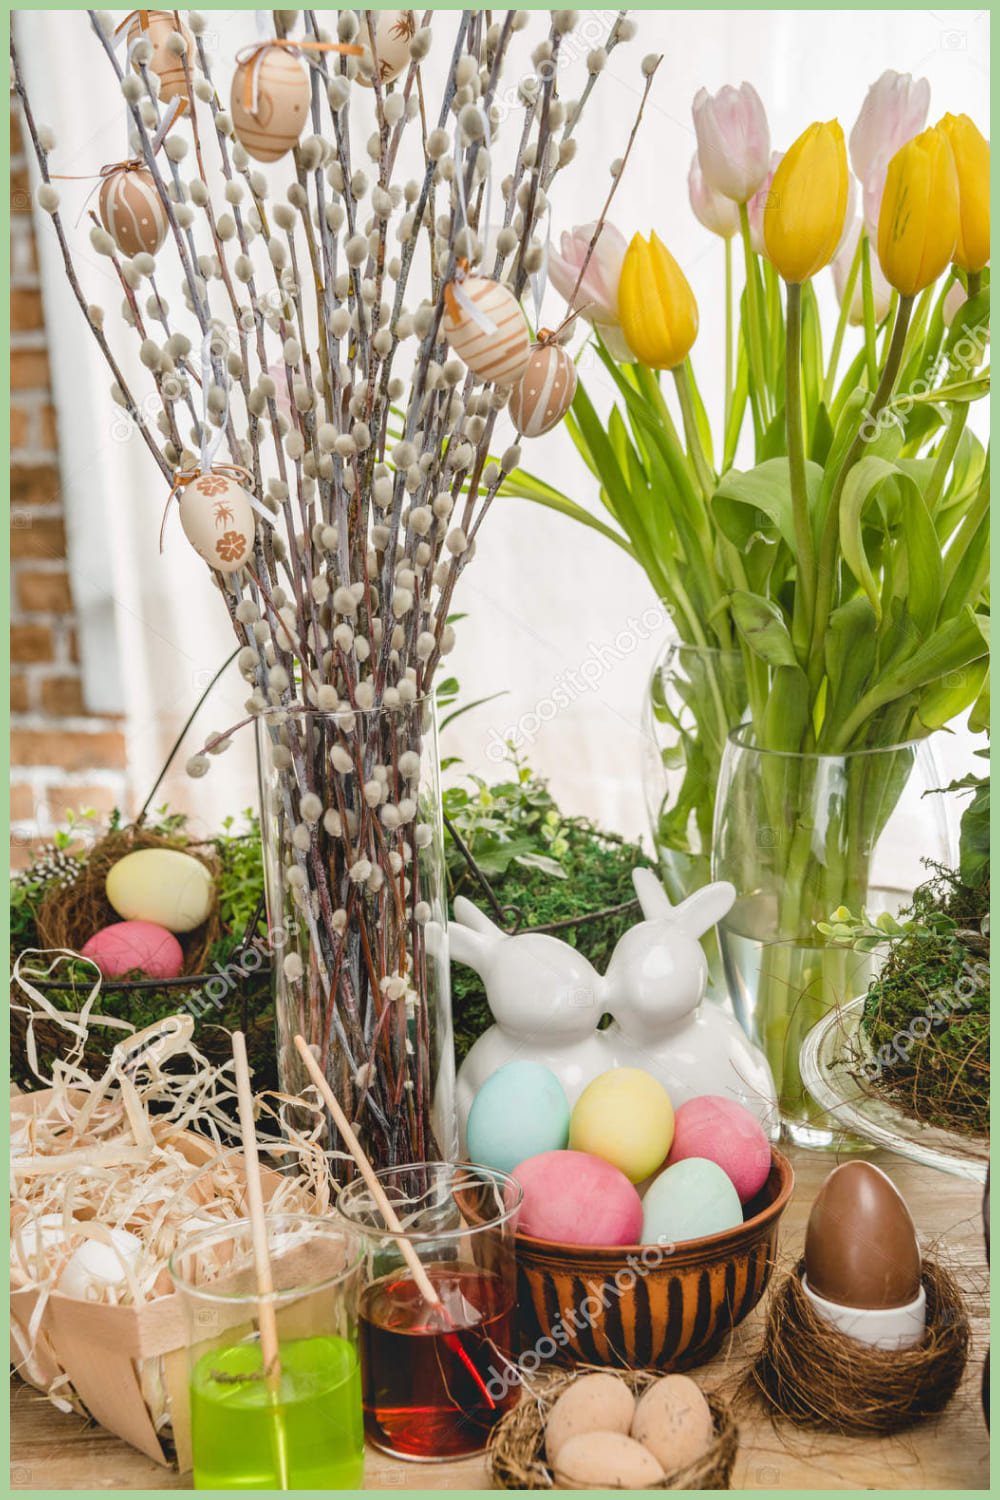 Composition of vases with willows and tulips, Easter eggs and figurines of rabbits.